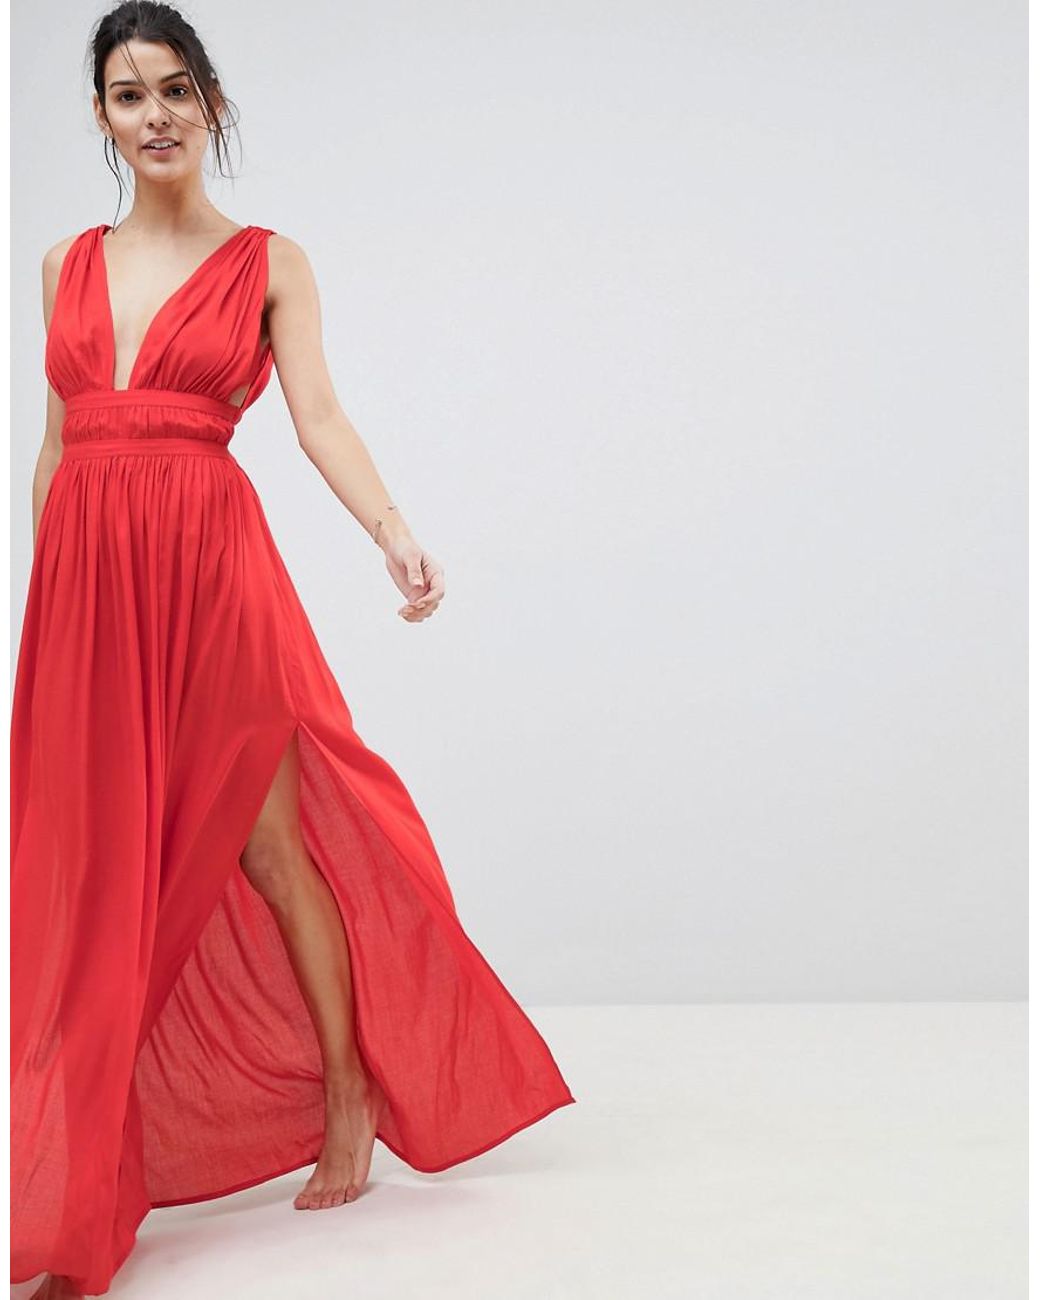 ASOS Grecian Plunge Maxi Woven Beach Dress in Red | Lyst